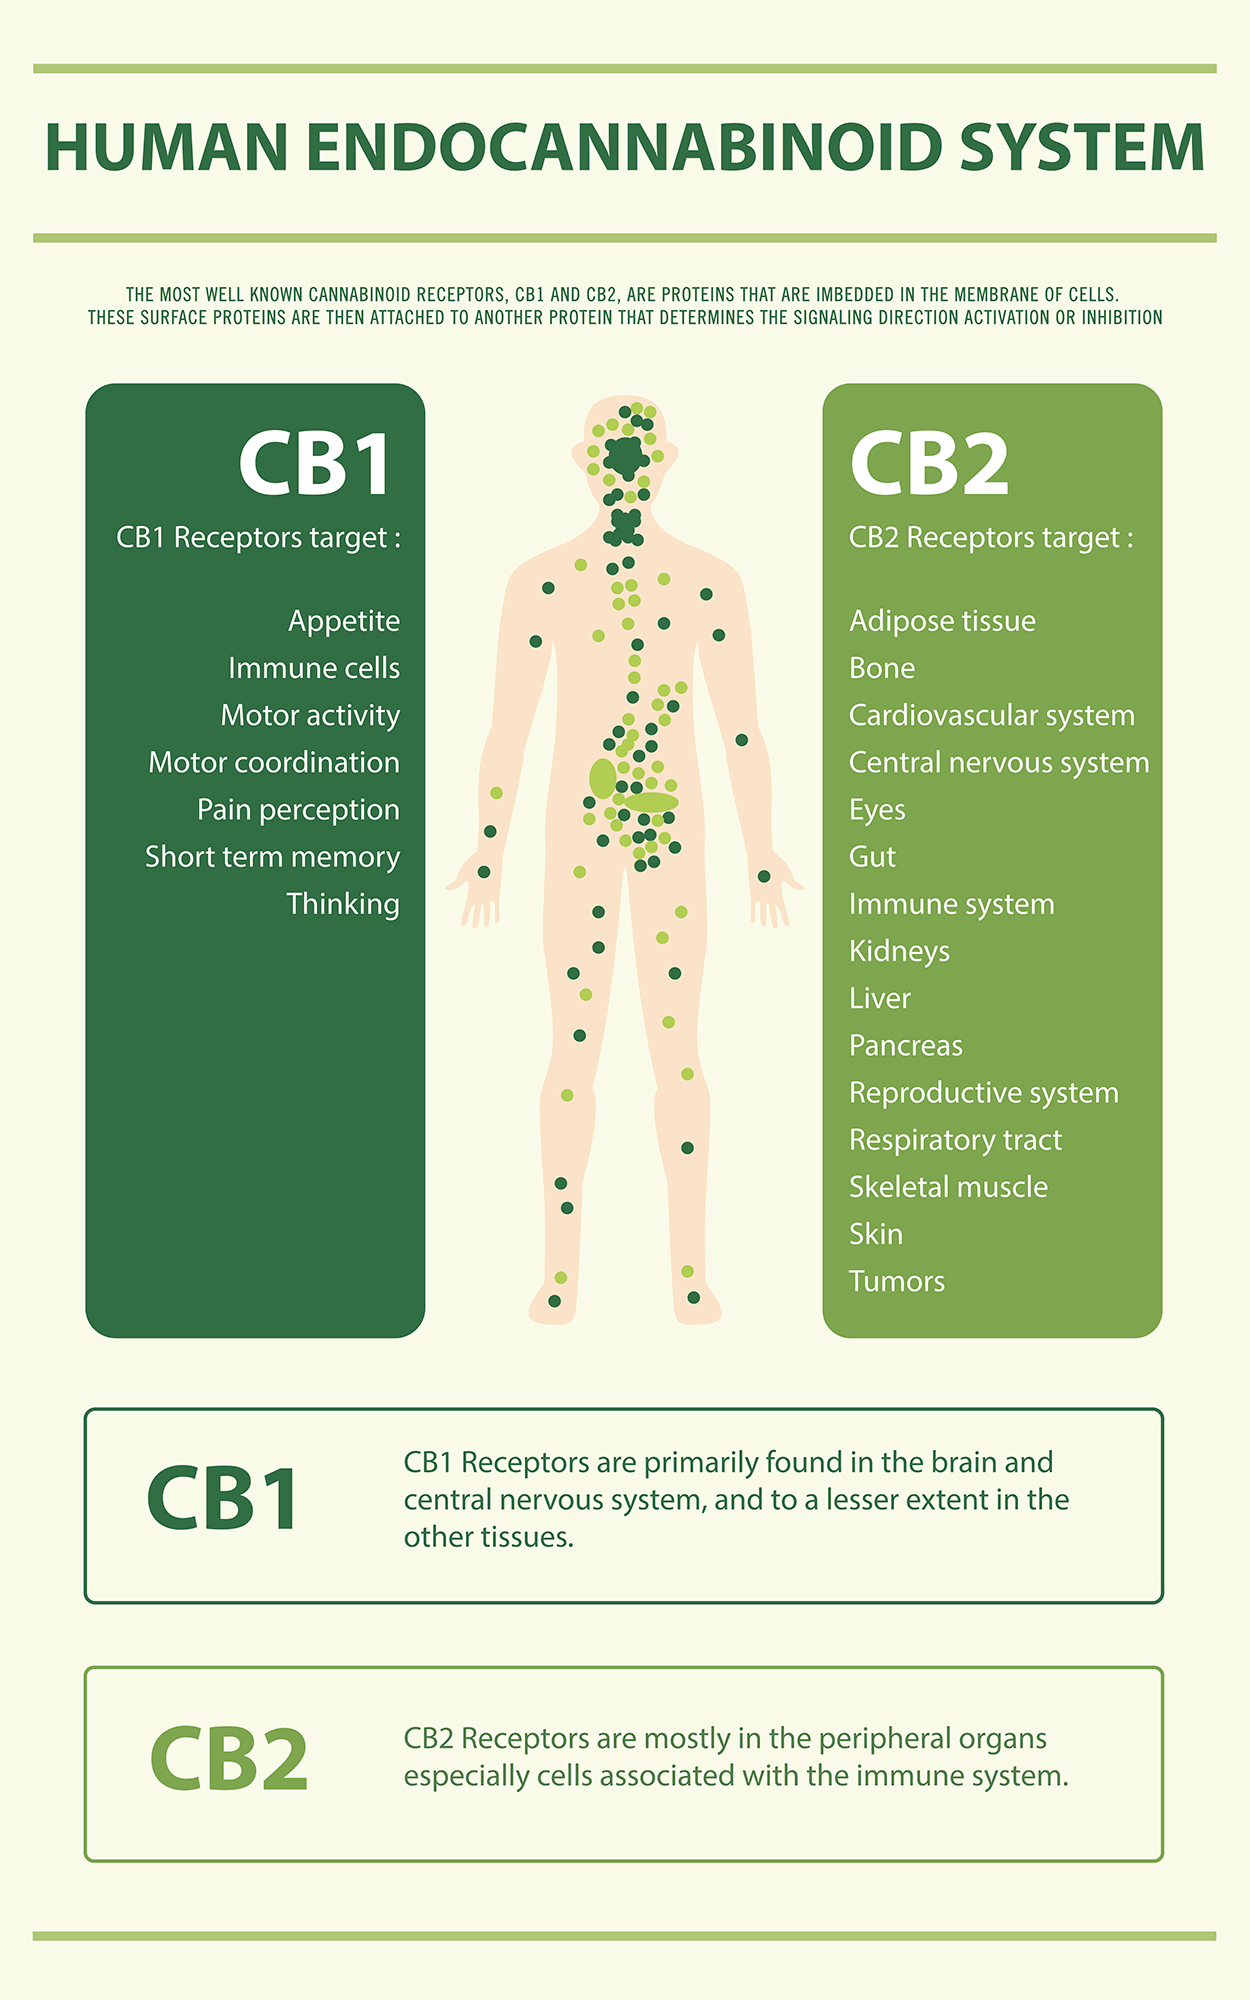 Infographic showing details of where CB1 and CB2 receptors are located throughout the body.